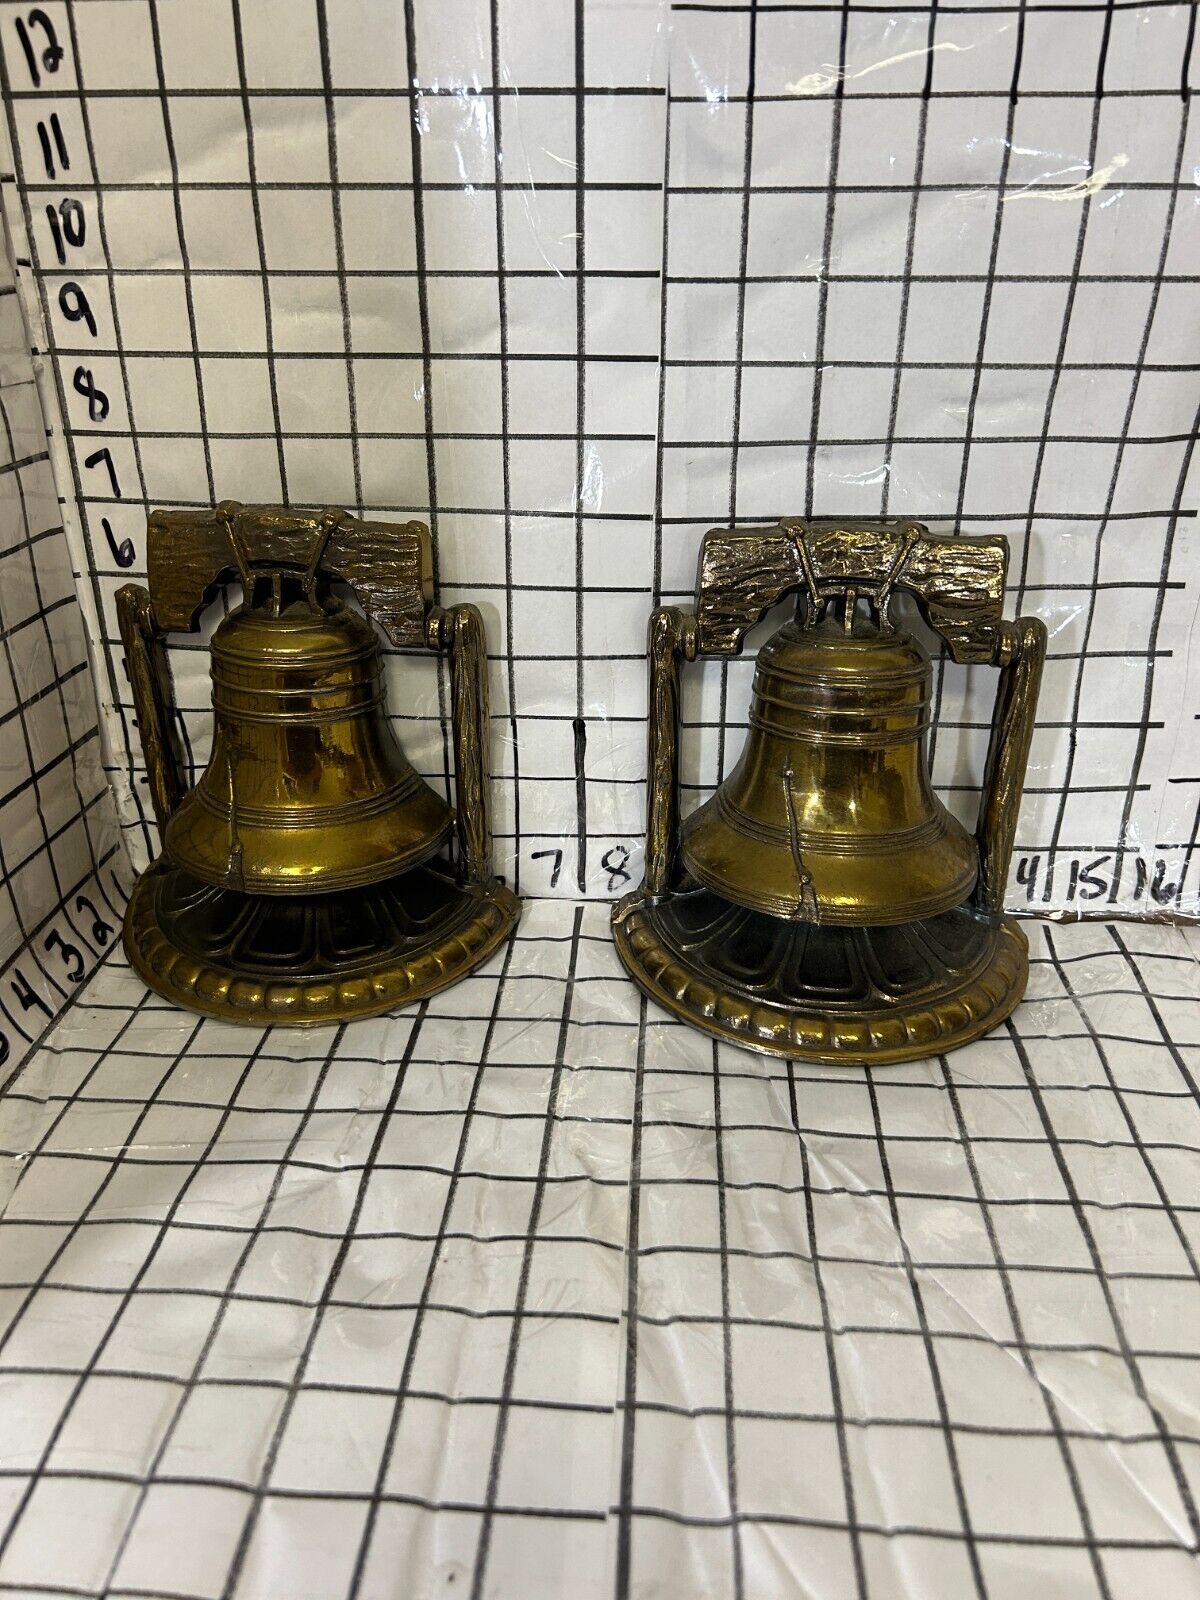 VINTAGE 1974 BRASS LIBERTY BELL BOOKENDS VERY NICE CONDITION BEAUTIFUL PATINA